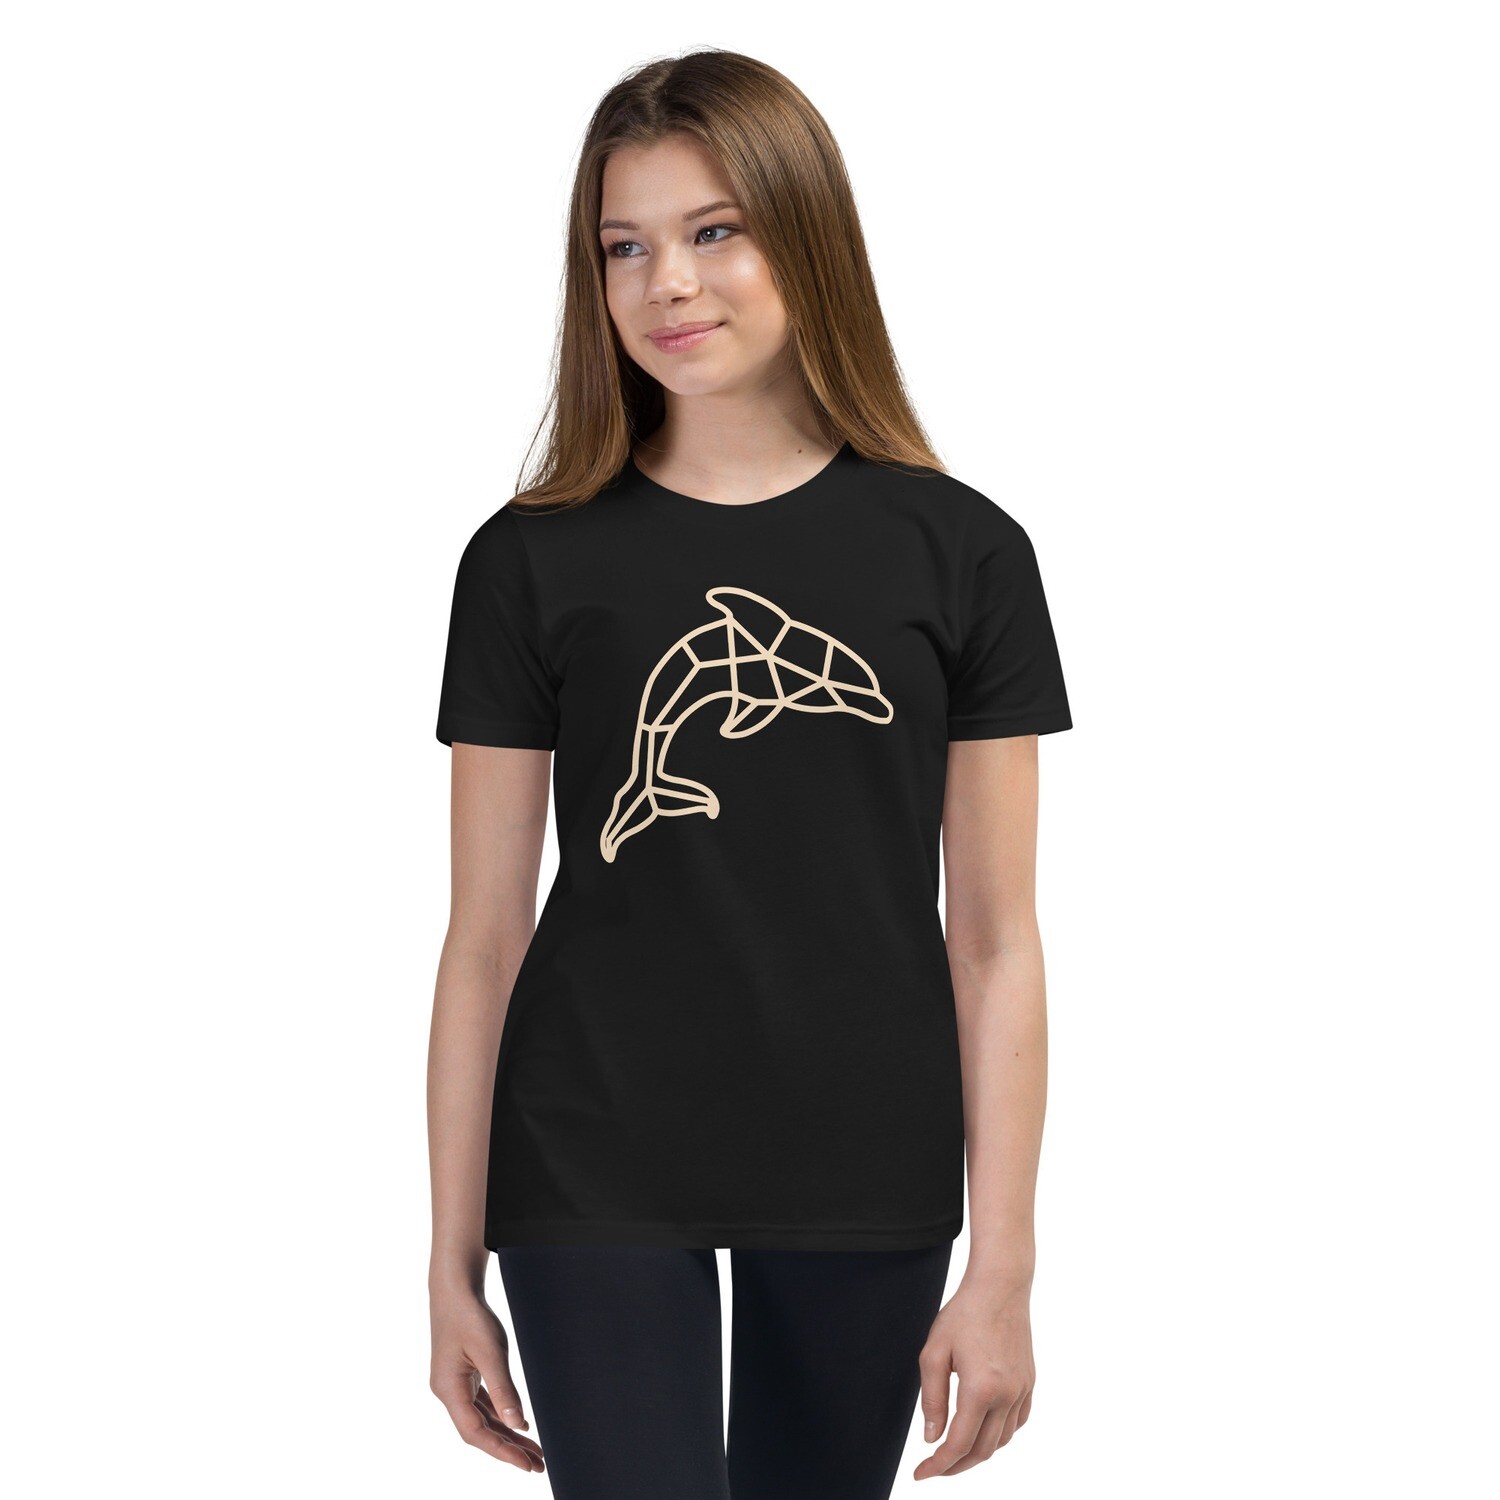 Fragmented Dolphin Youth Tee